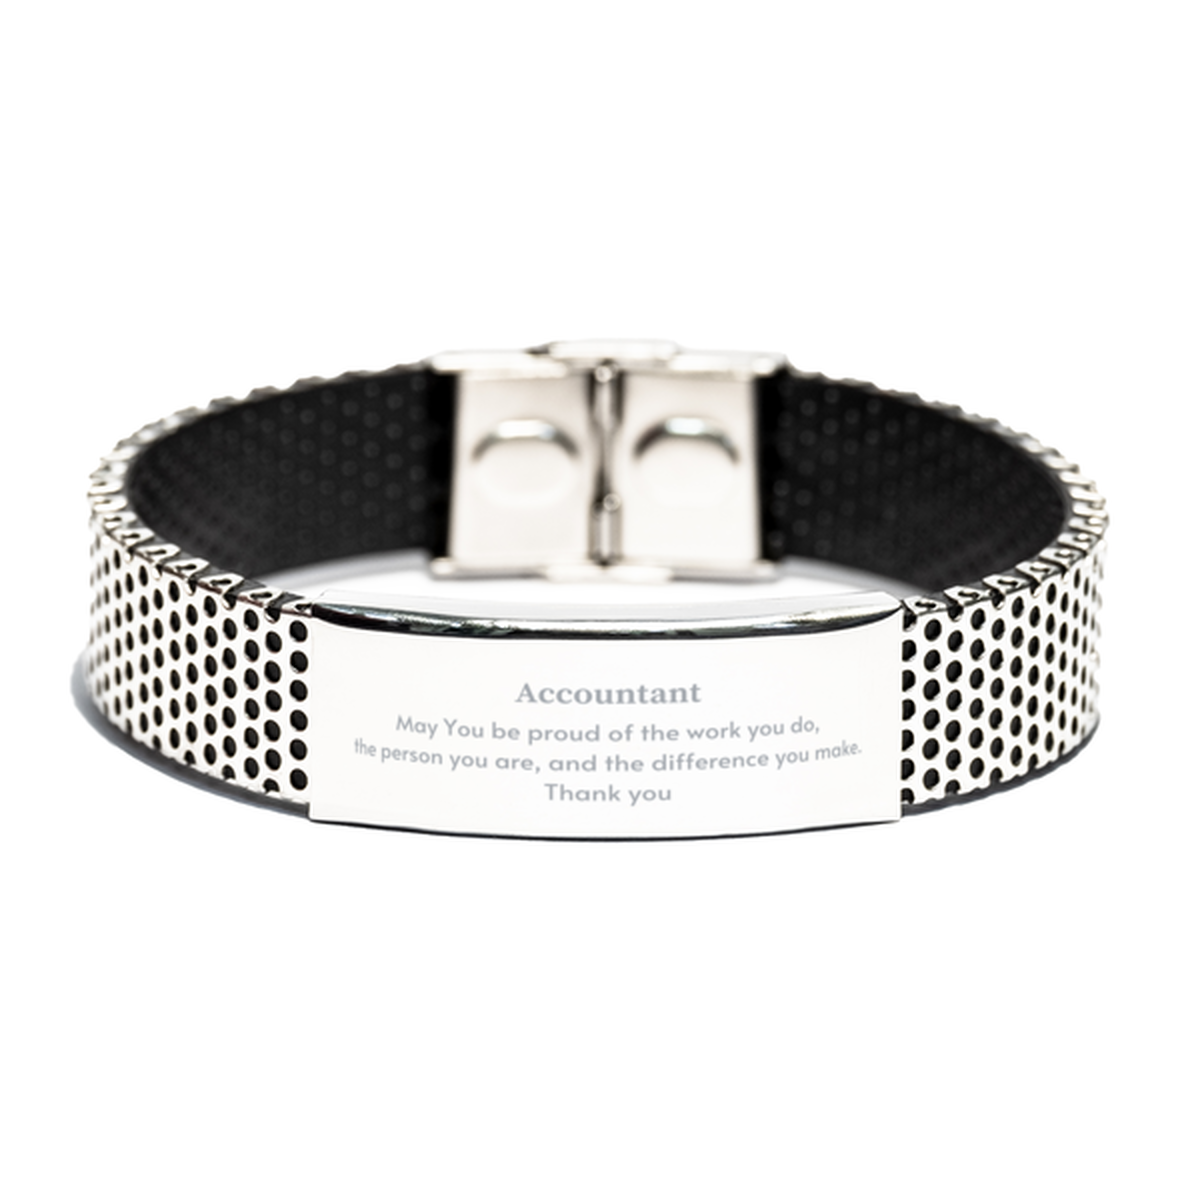 Heartwarming Stainless Steel Bracelet Retirement Coworkers Gifts for Accountant, Accountant May You be proud of the work you do, the person you are Gifts for Boss Men Women Friends